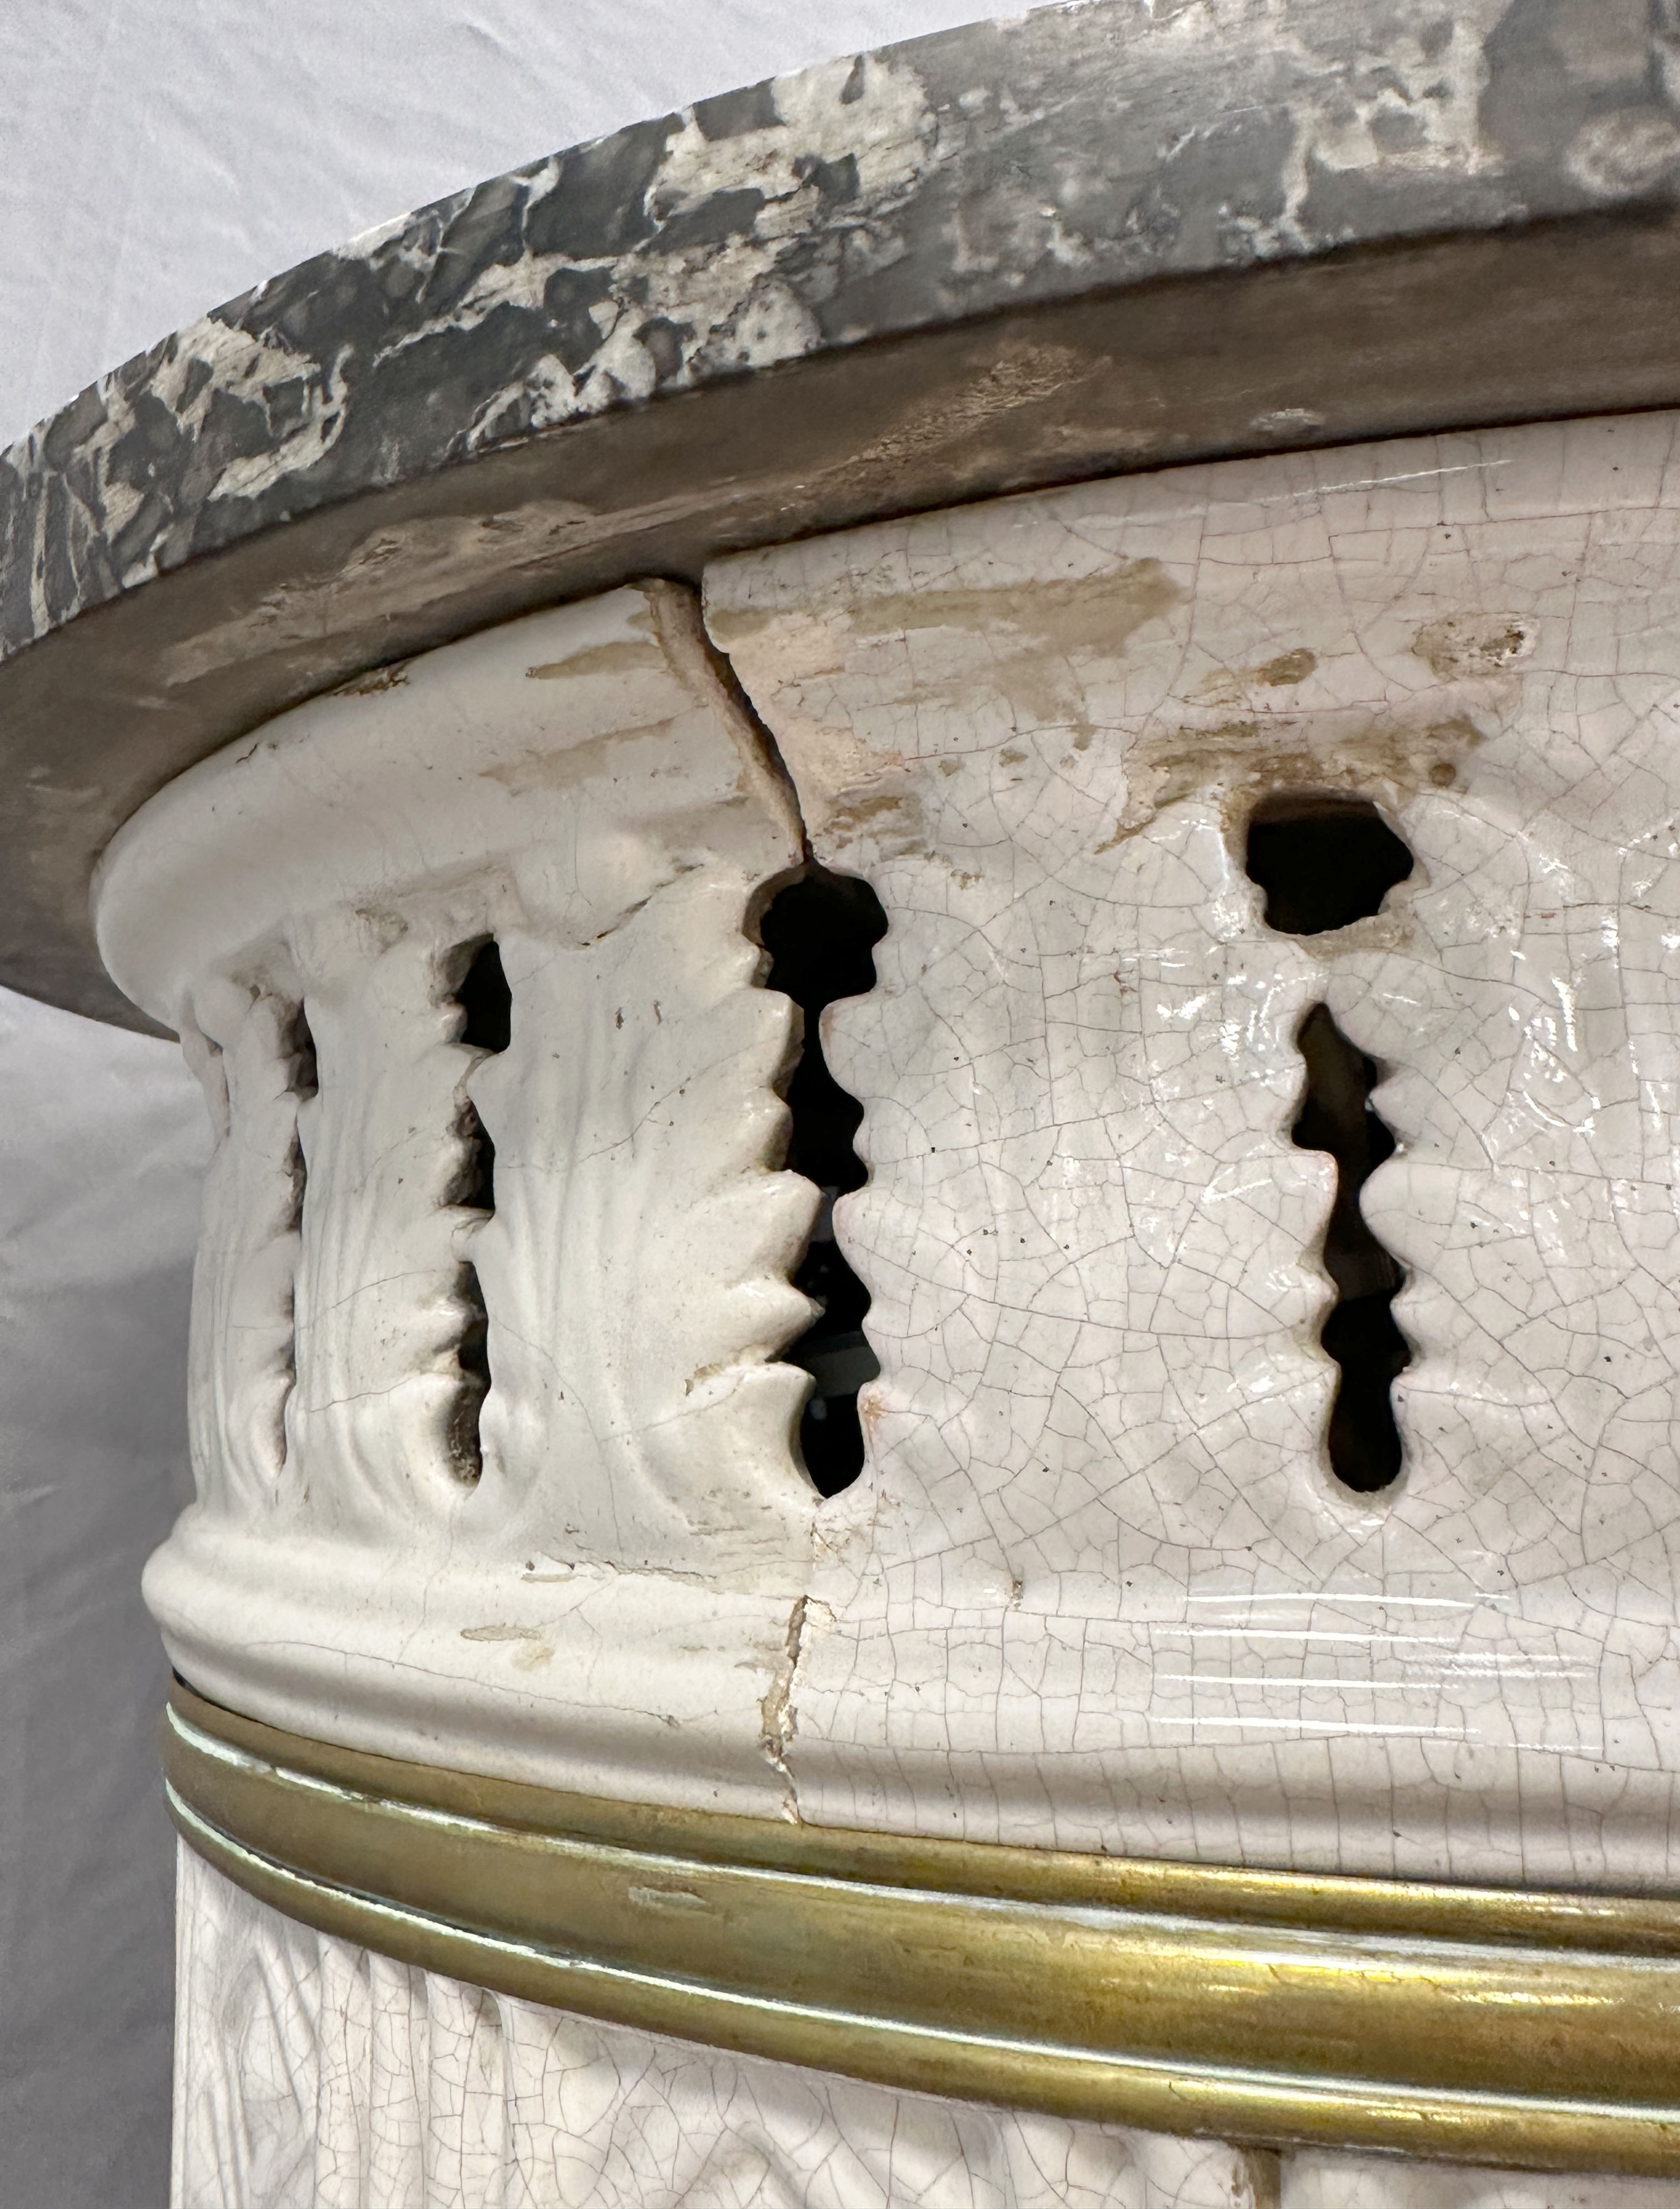 White Biedermeier round stove with tiles in relief structure. - Image 11 of 19